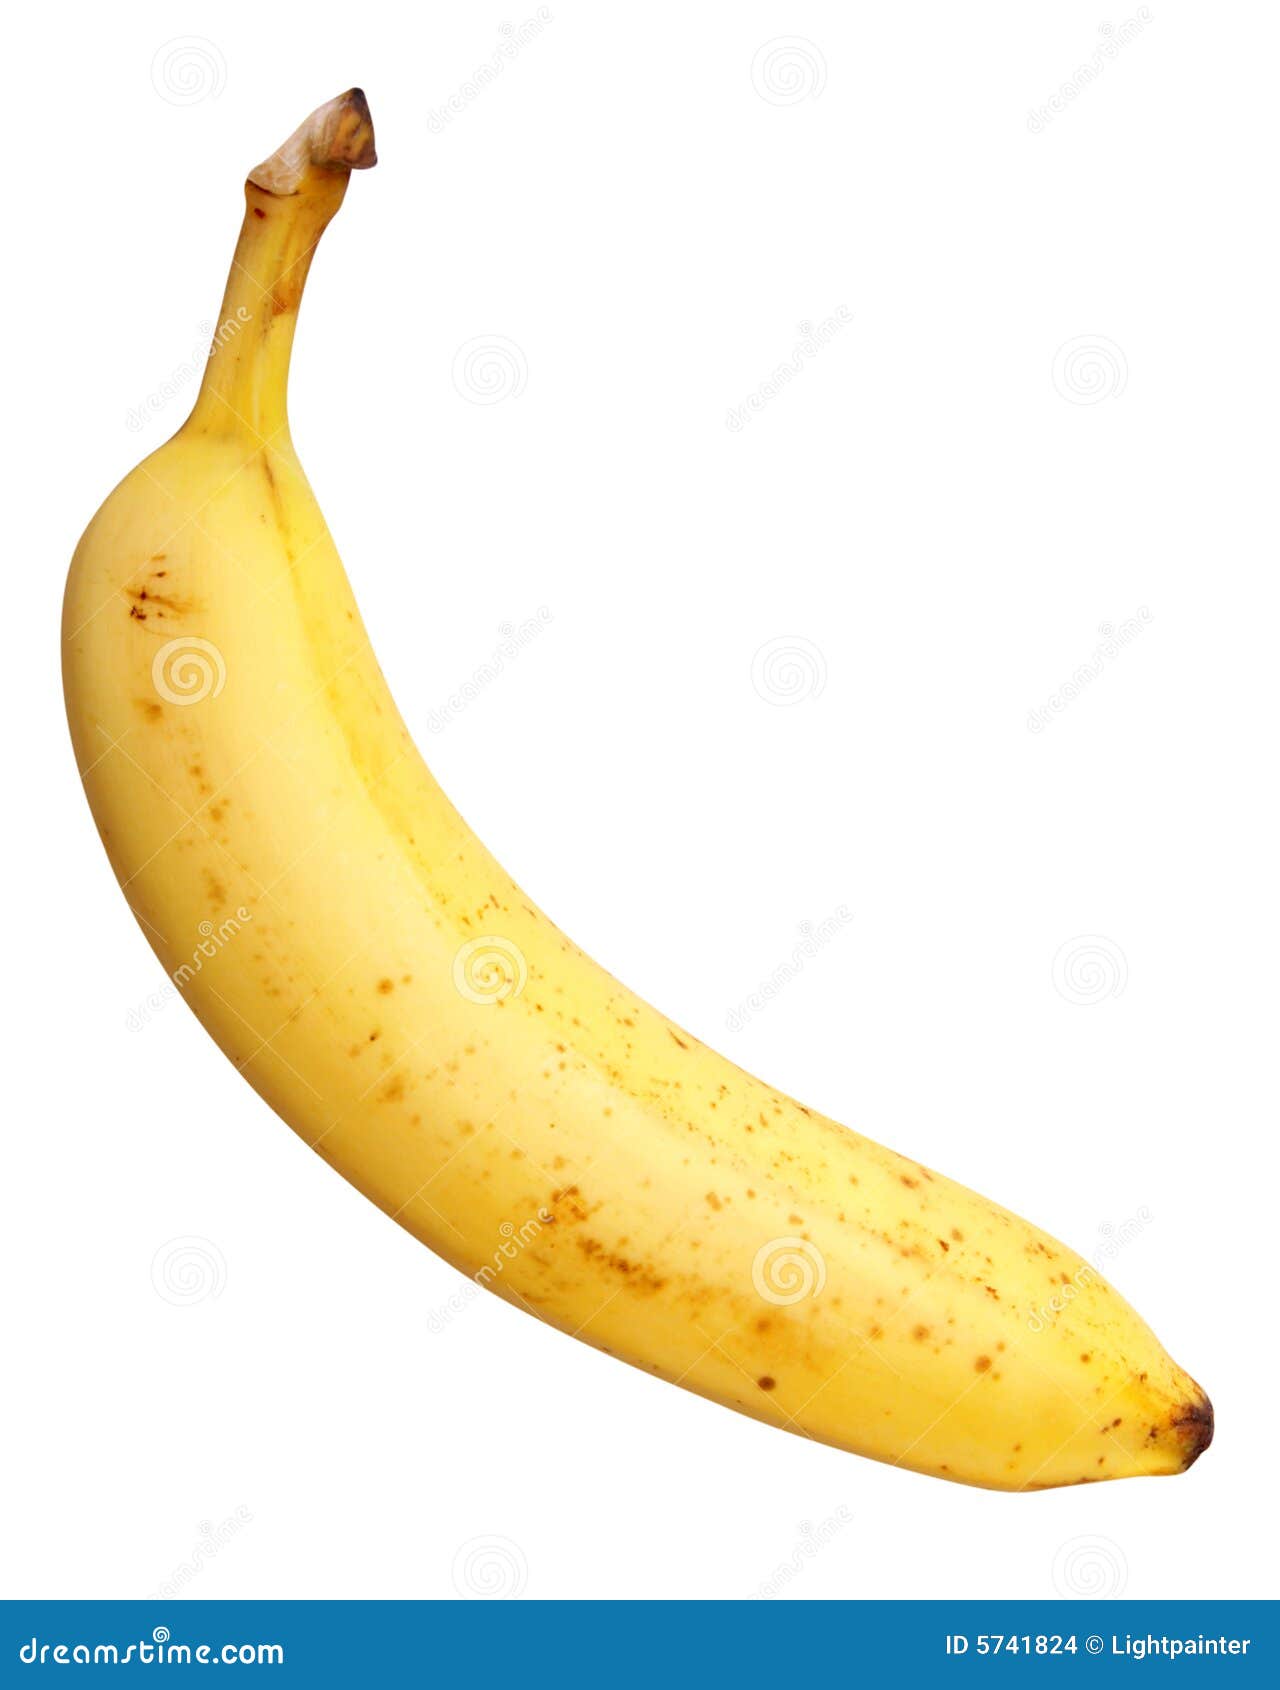 All 98+ Images what are the brown spots on bananas Full HD, 2k, 4k